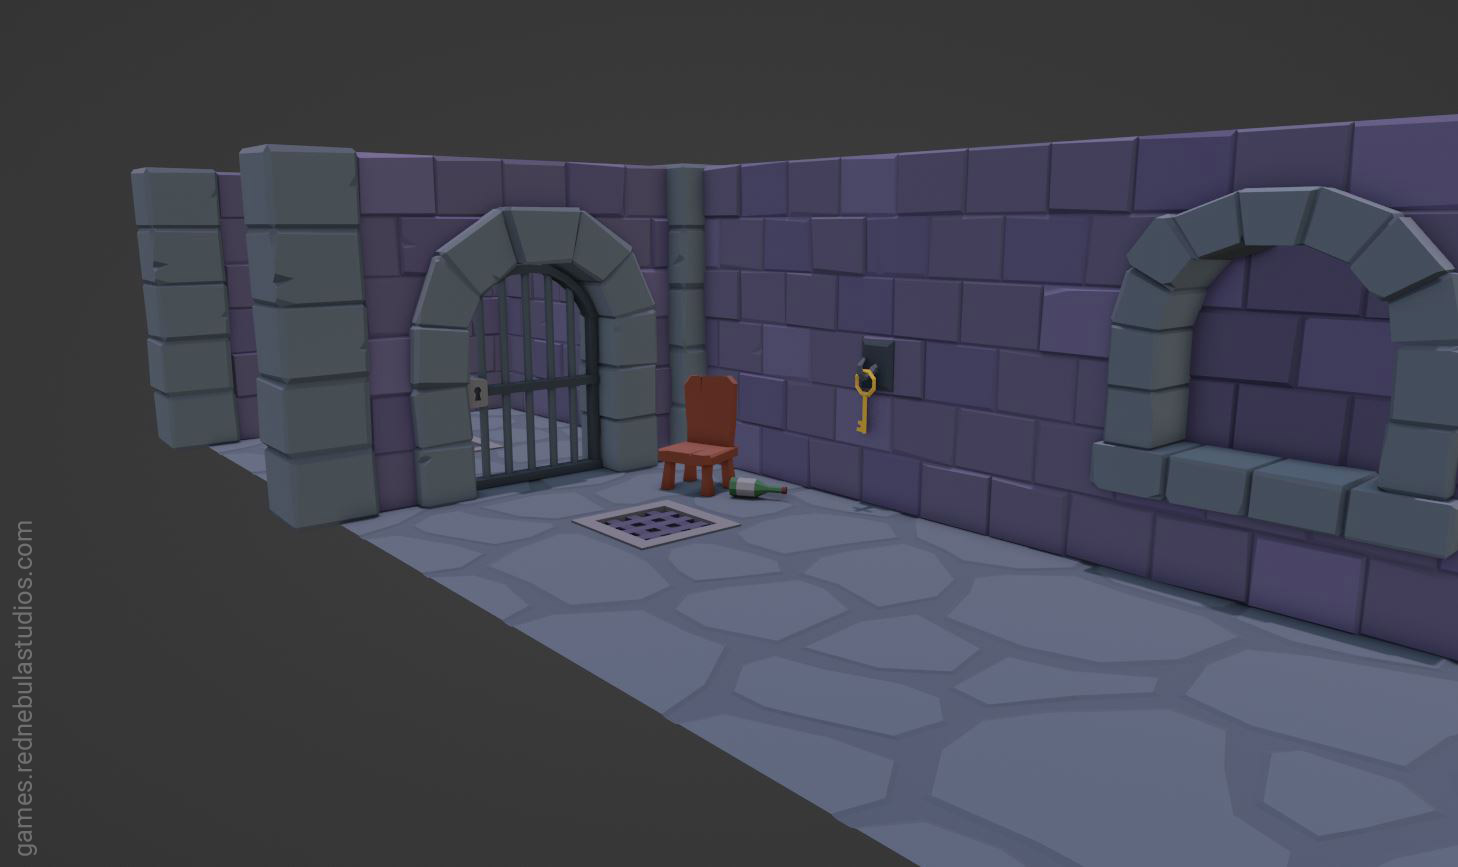 A screenshot of low poly game assets with purple dungeon walls, a cell door, a chair, a wine bottle on its side, and a key on a hook.